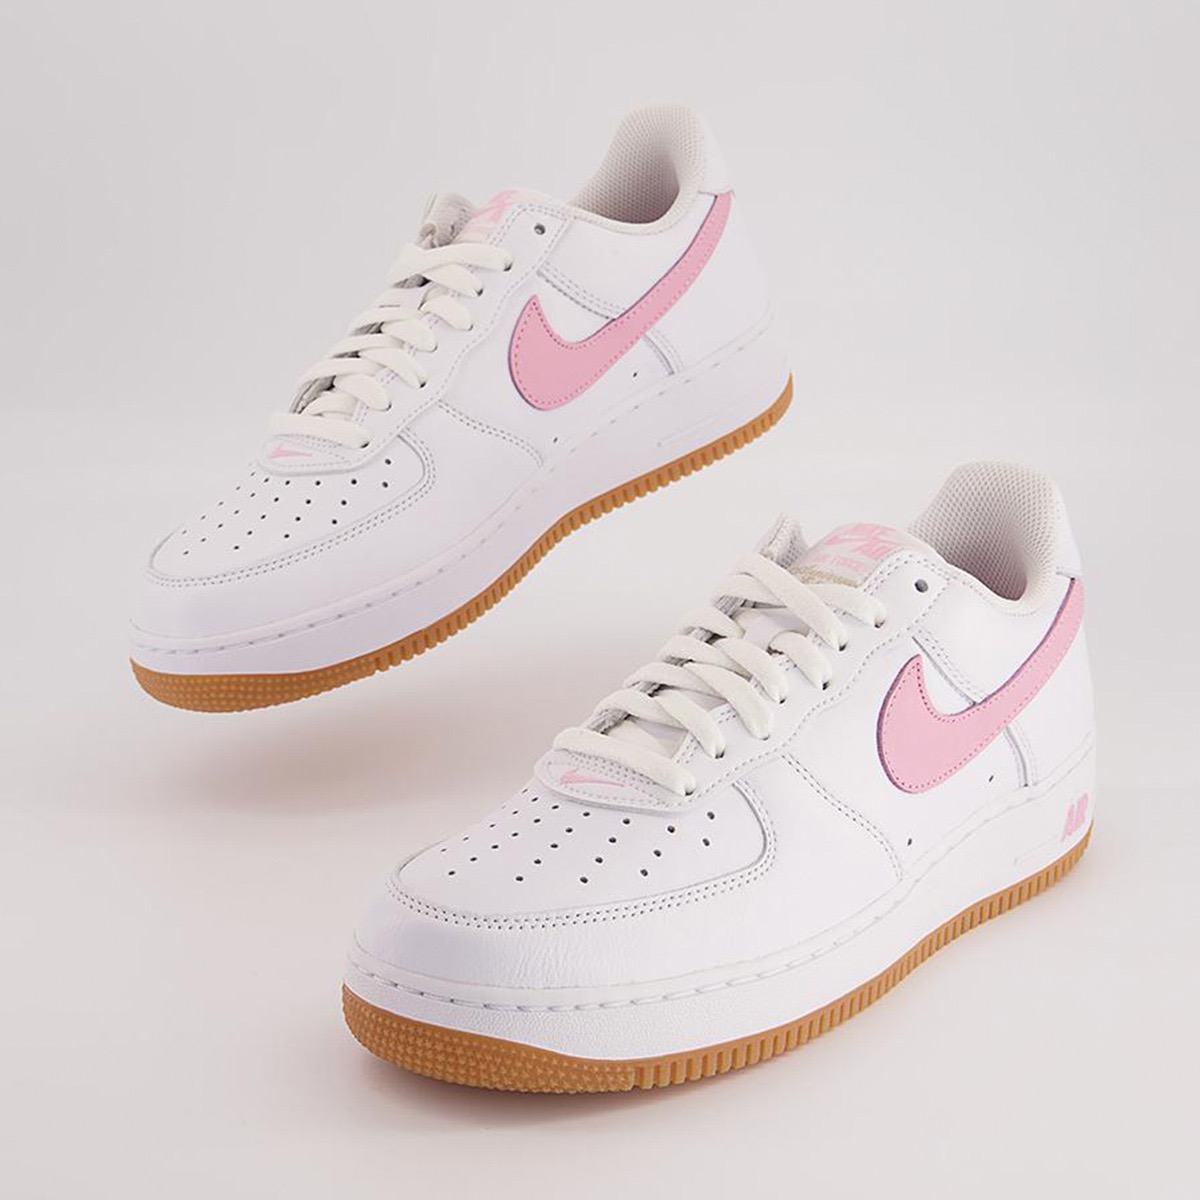 Nike Air Force 1 Low Retro “Color of the Month” White/Pinkが国内10 